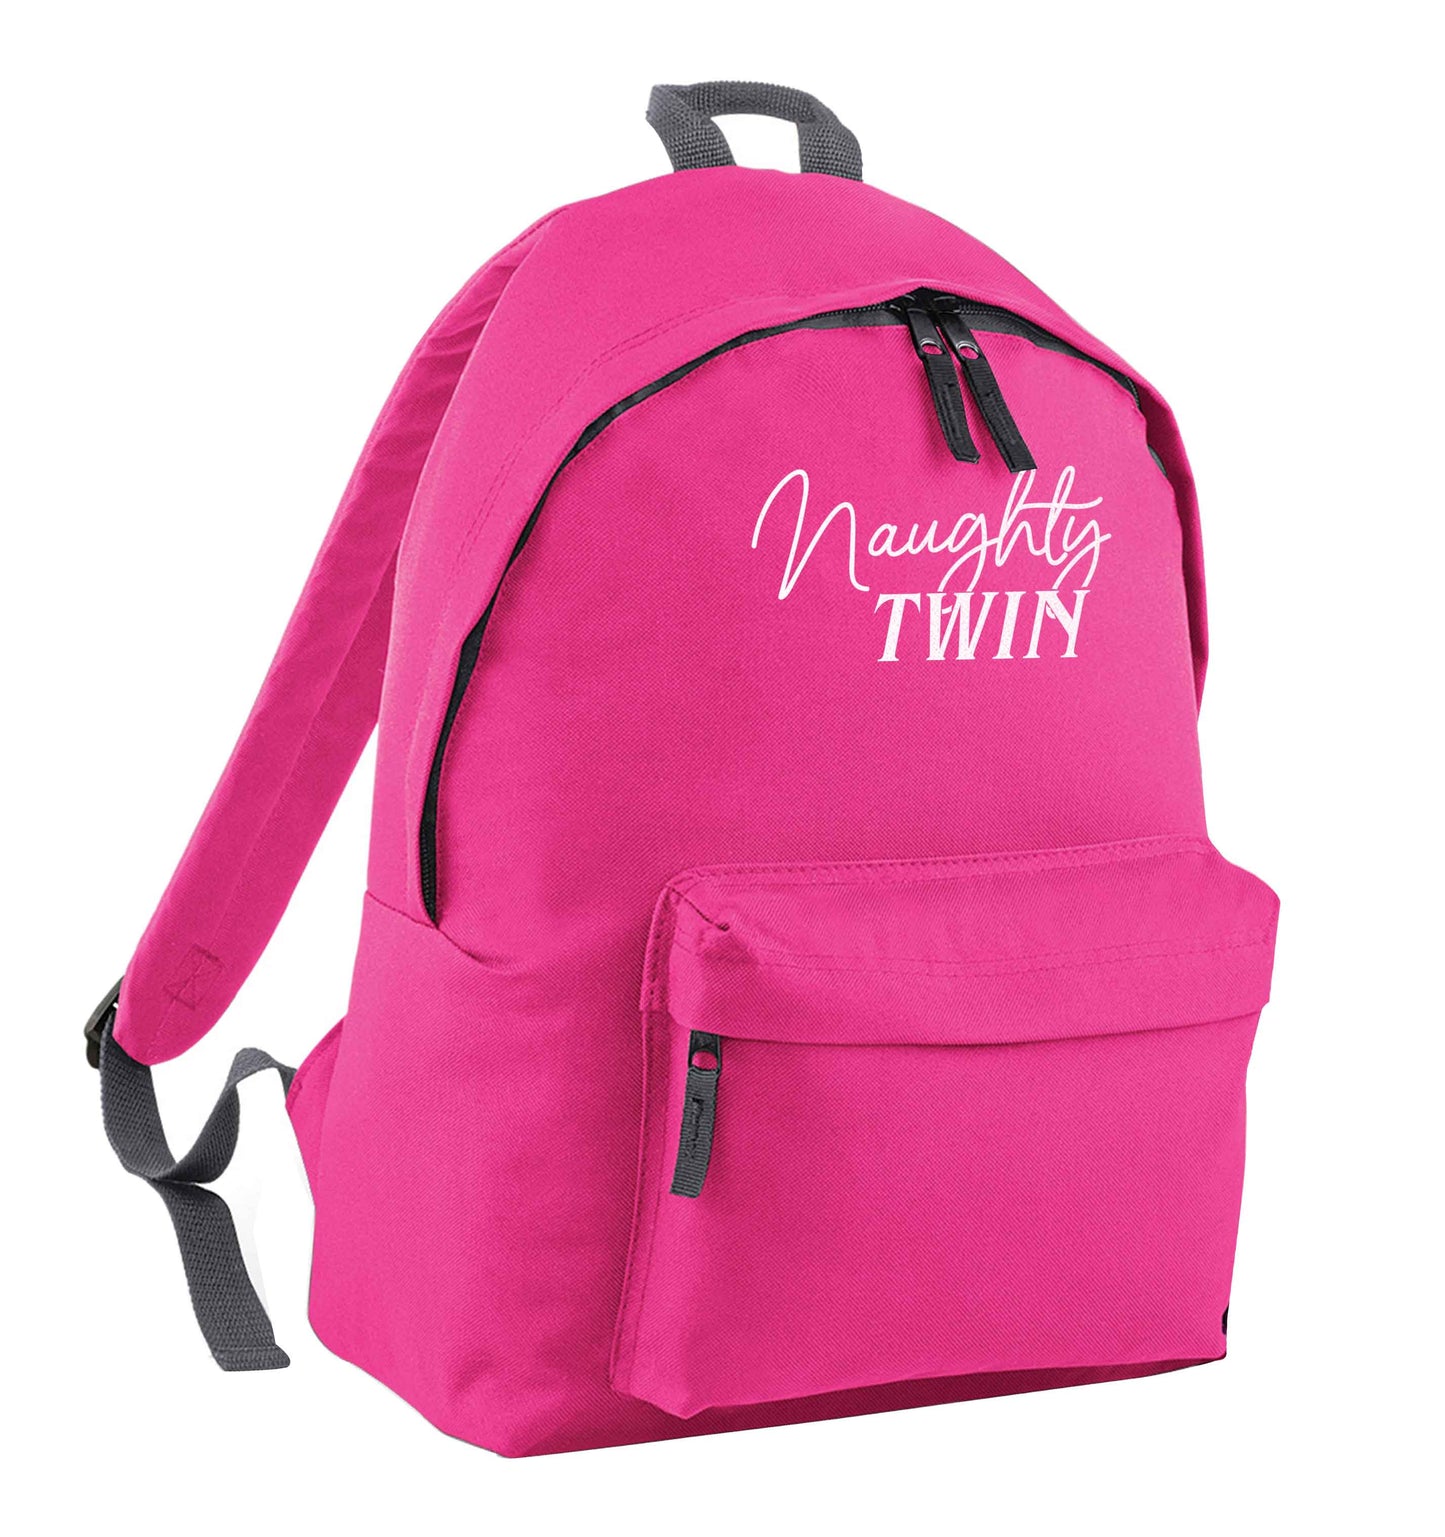 Naughty twin pink adults backpack